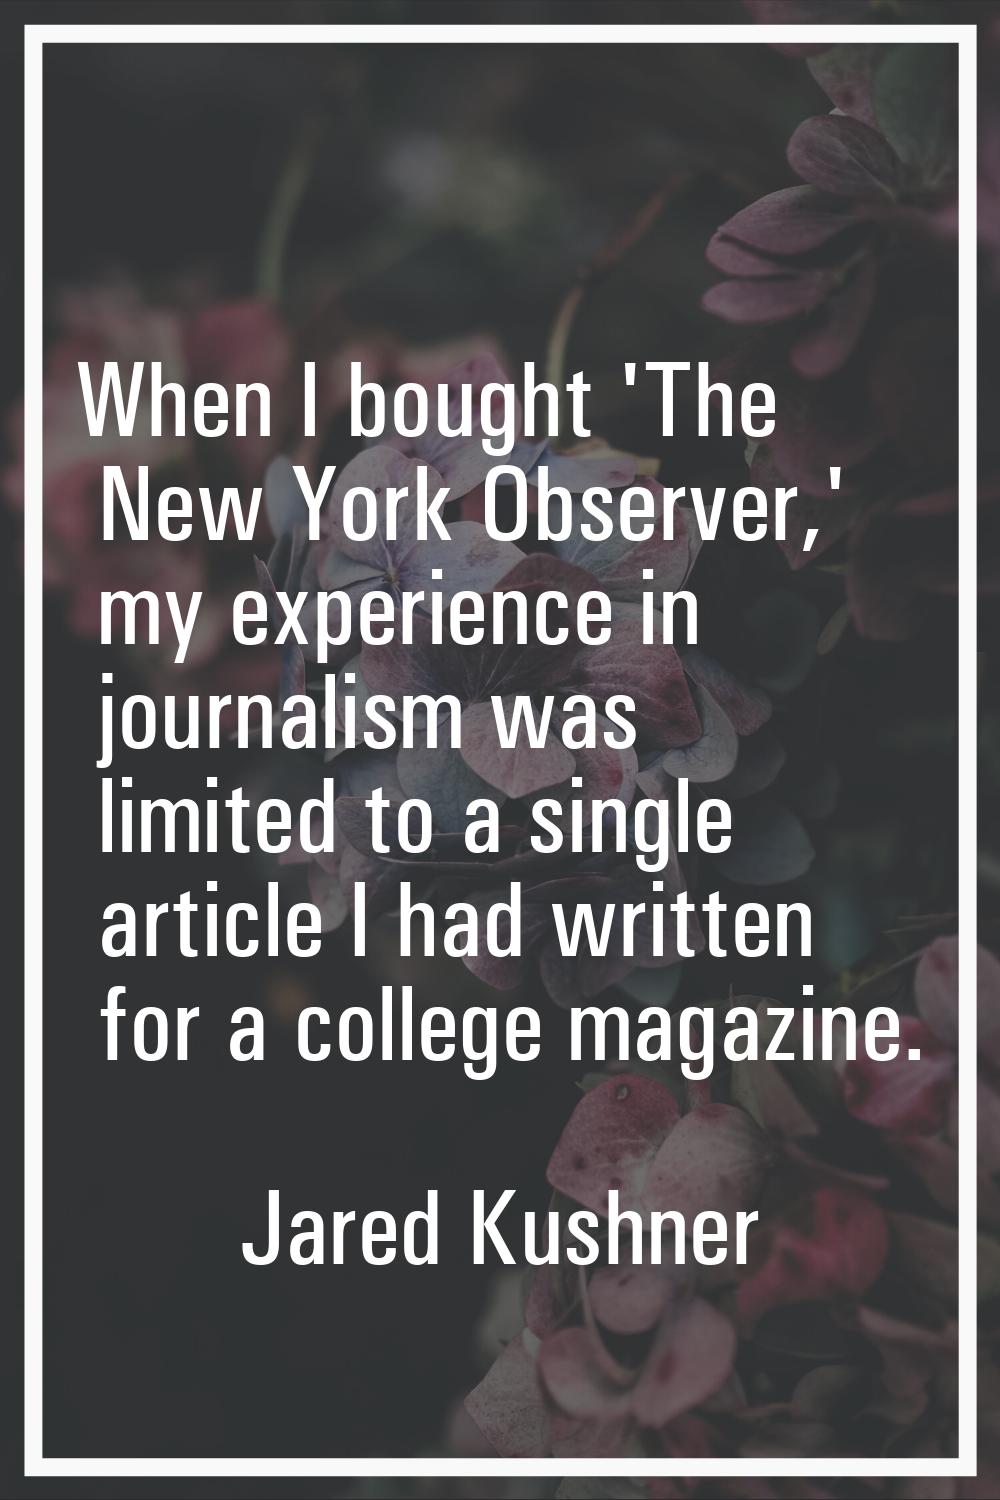 When I bought 'The New York Observer,' my experience in journalism was limited to a single article 